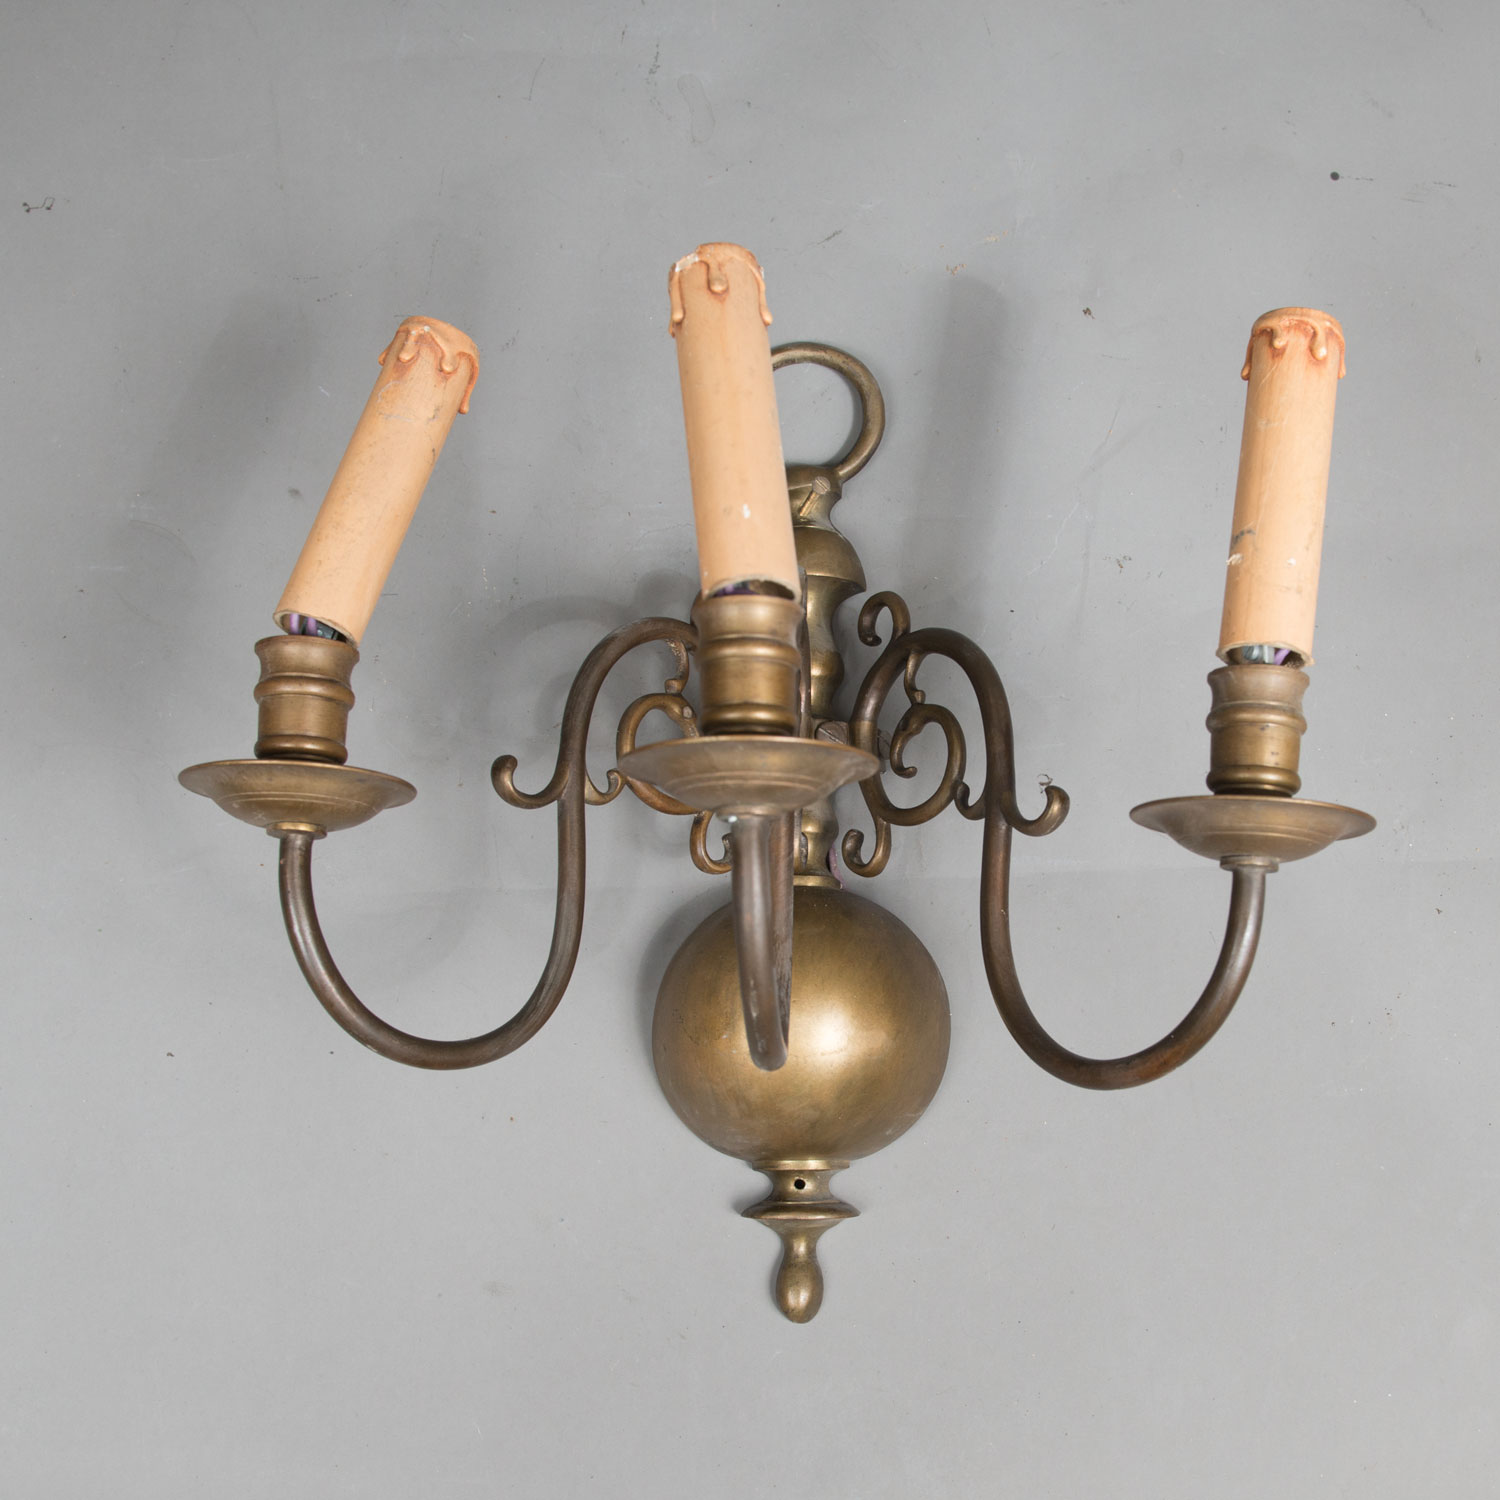 Pair of Flemish Wall Lights - Image 2 of 3